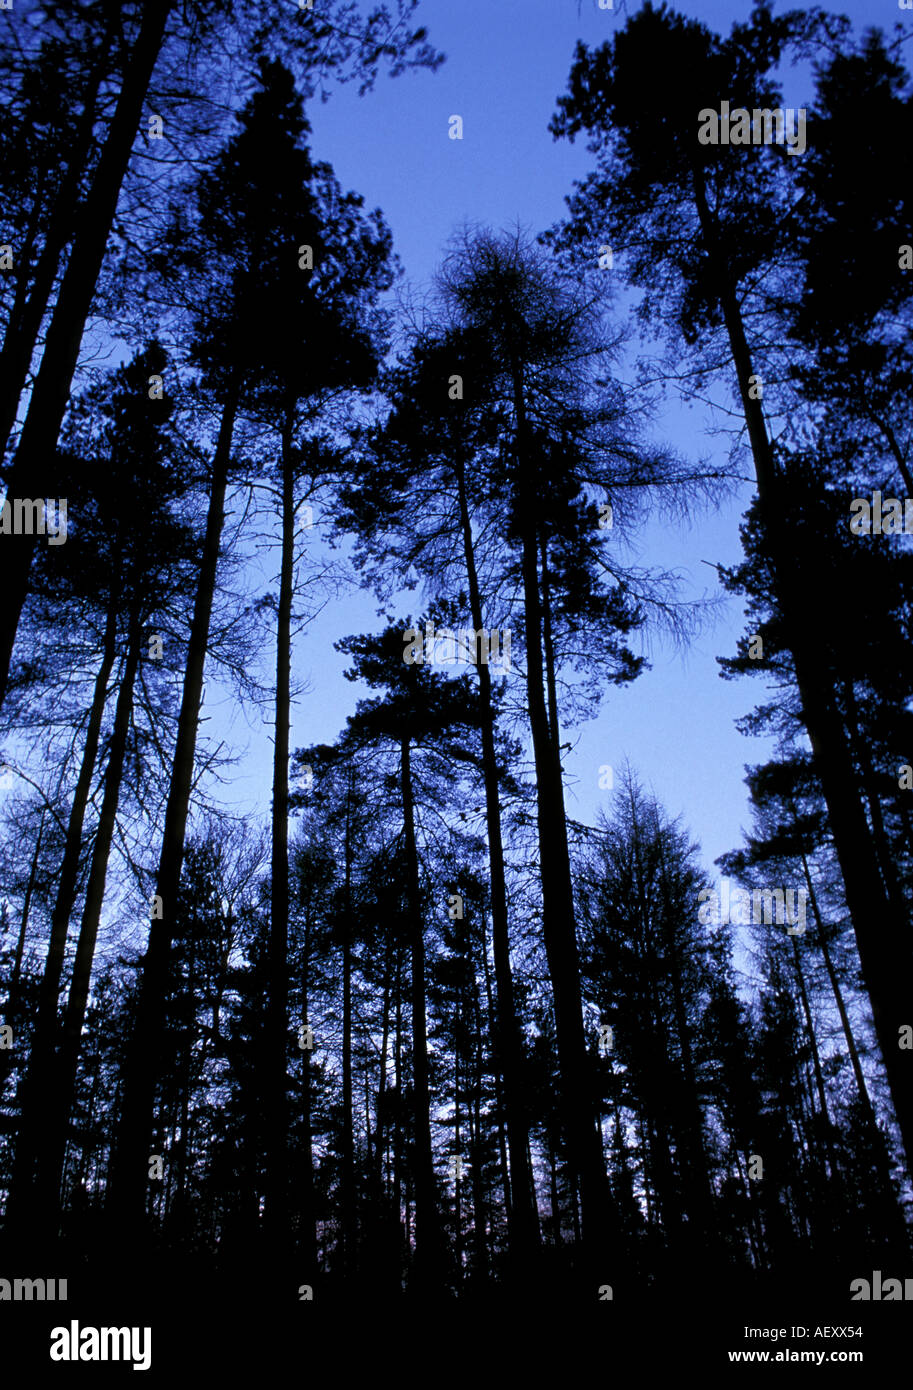 Portrait format image of Scottish forest silhouetted against an early morning sky Stock Photo